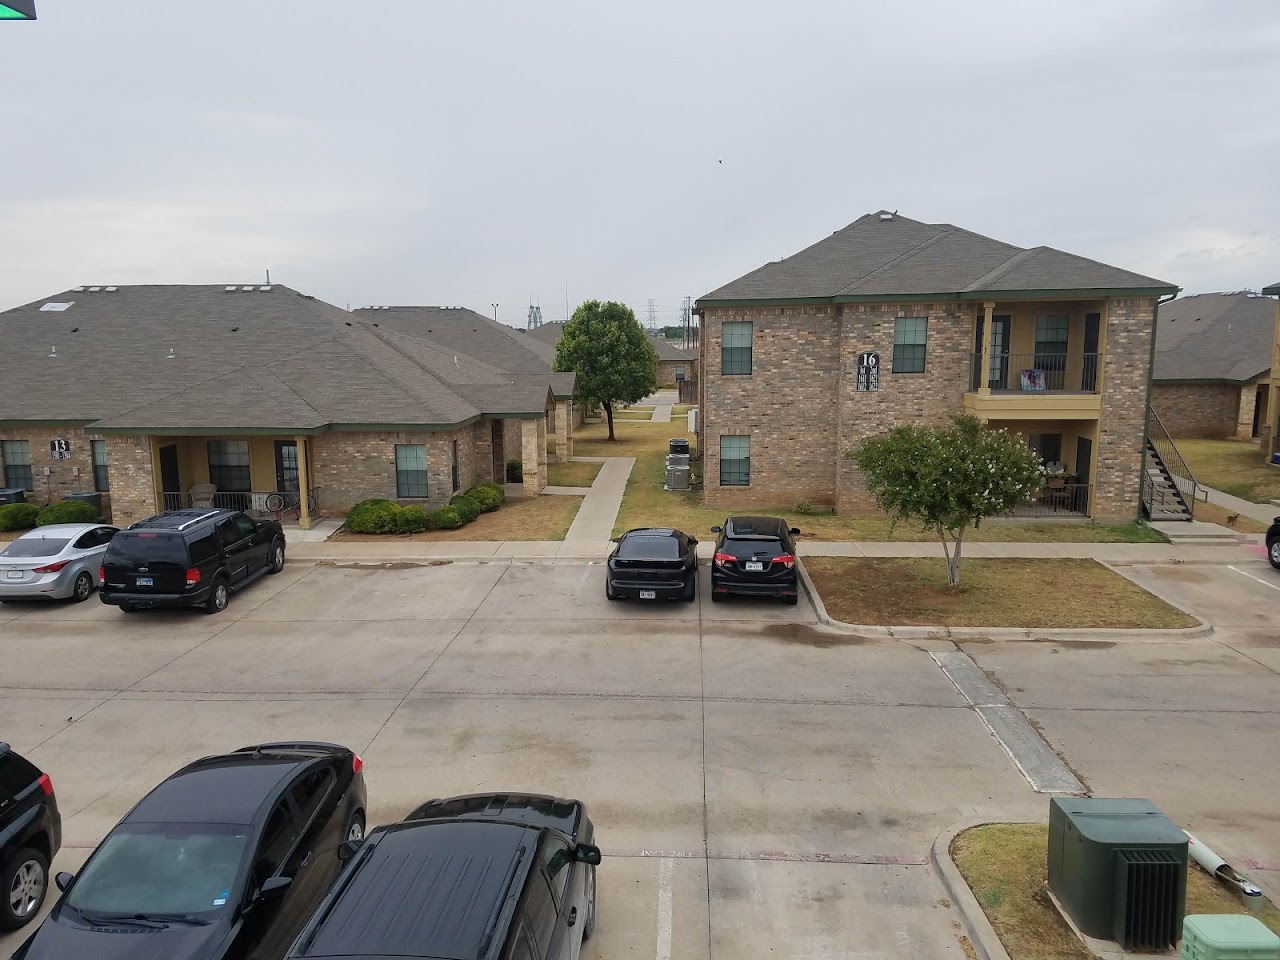 Photo of STERLING SPRINGS VILLAS. Affordable housing located at 1701 N FAIRGROUNDS RD MIDLAND, TX 79706